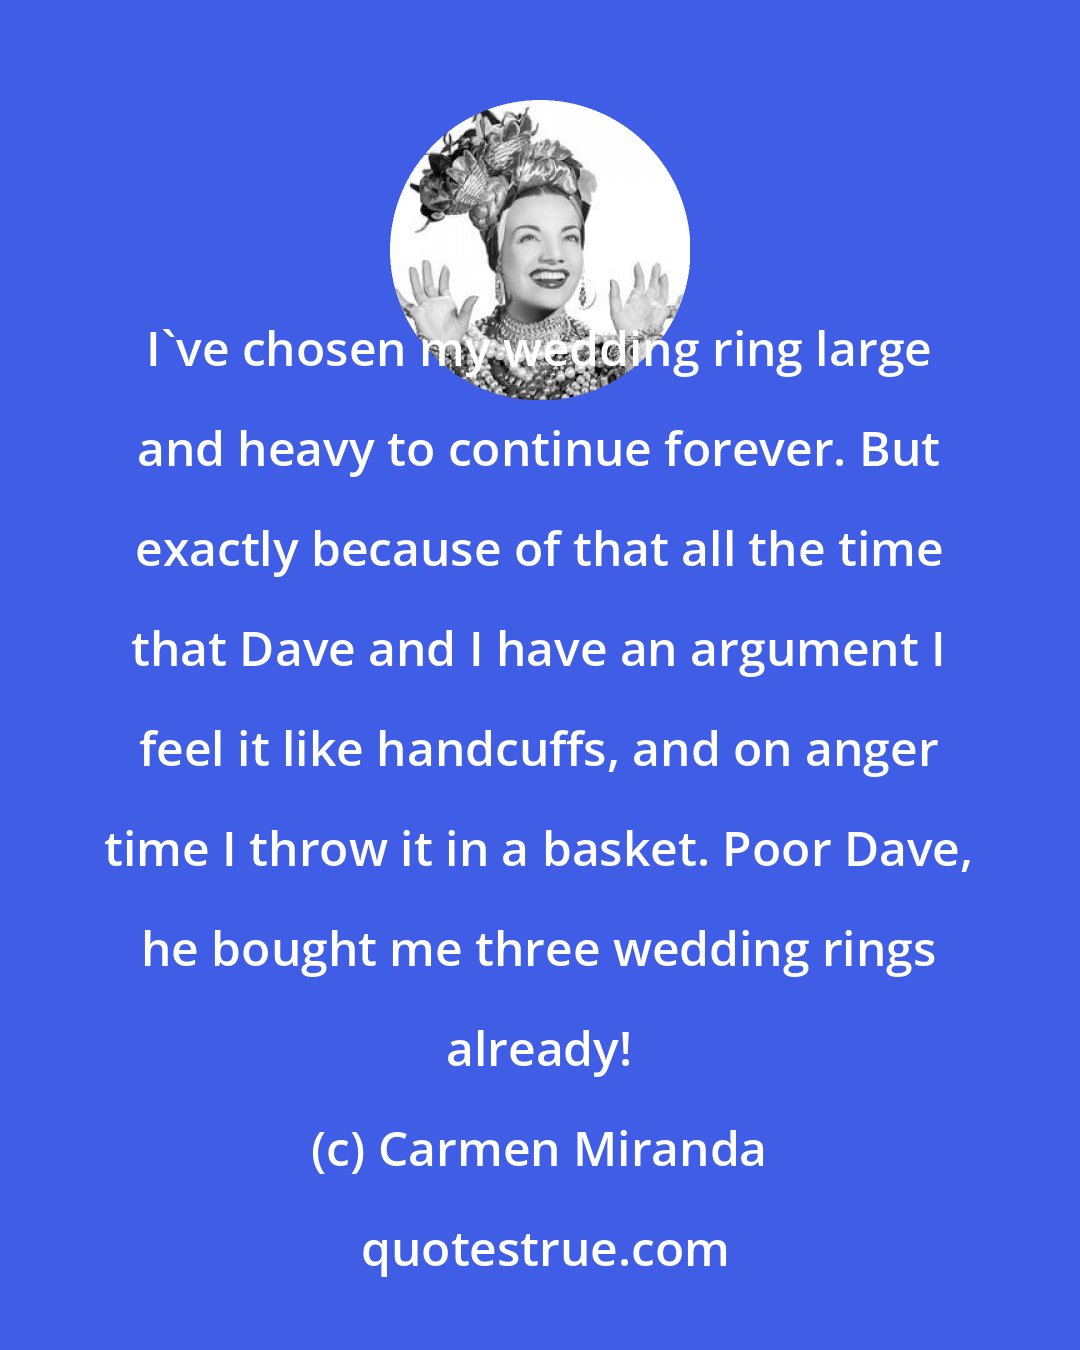 Carmen Miranda: I've chosen my wedding ring large and heavy to continue forever. But exactly because of that all the time that Dave and I have an argument I feel it like handcuffs, and on anger time I throw it in a basket. Poor Dave, he bought me three wedding rings already!